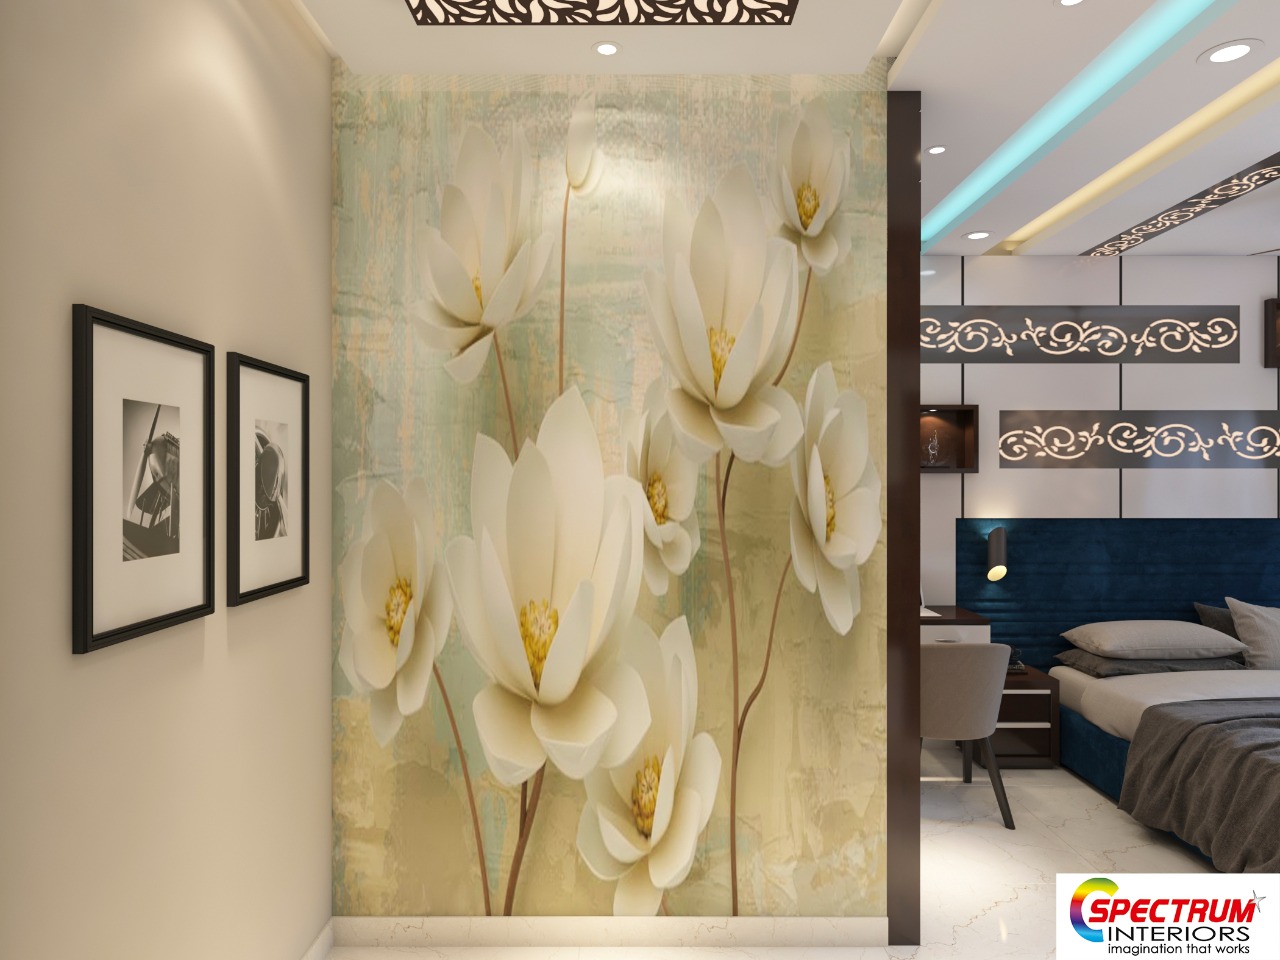 3D Wallpaper Designs: A Useful Way to Spruce Up Your Rooms in Kolkata